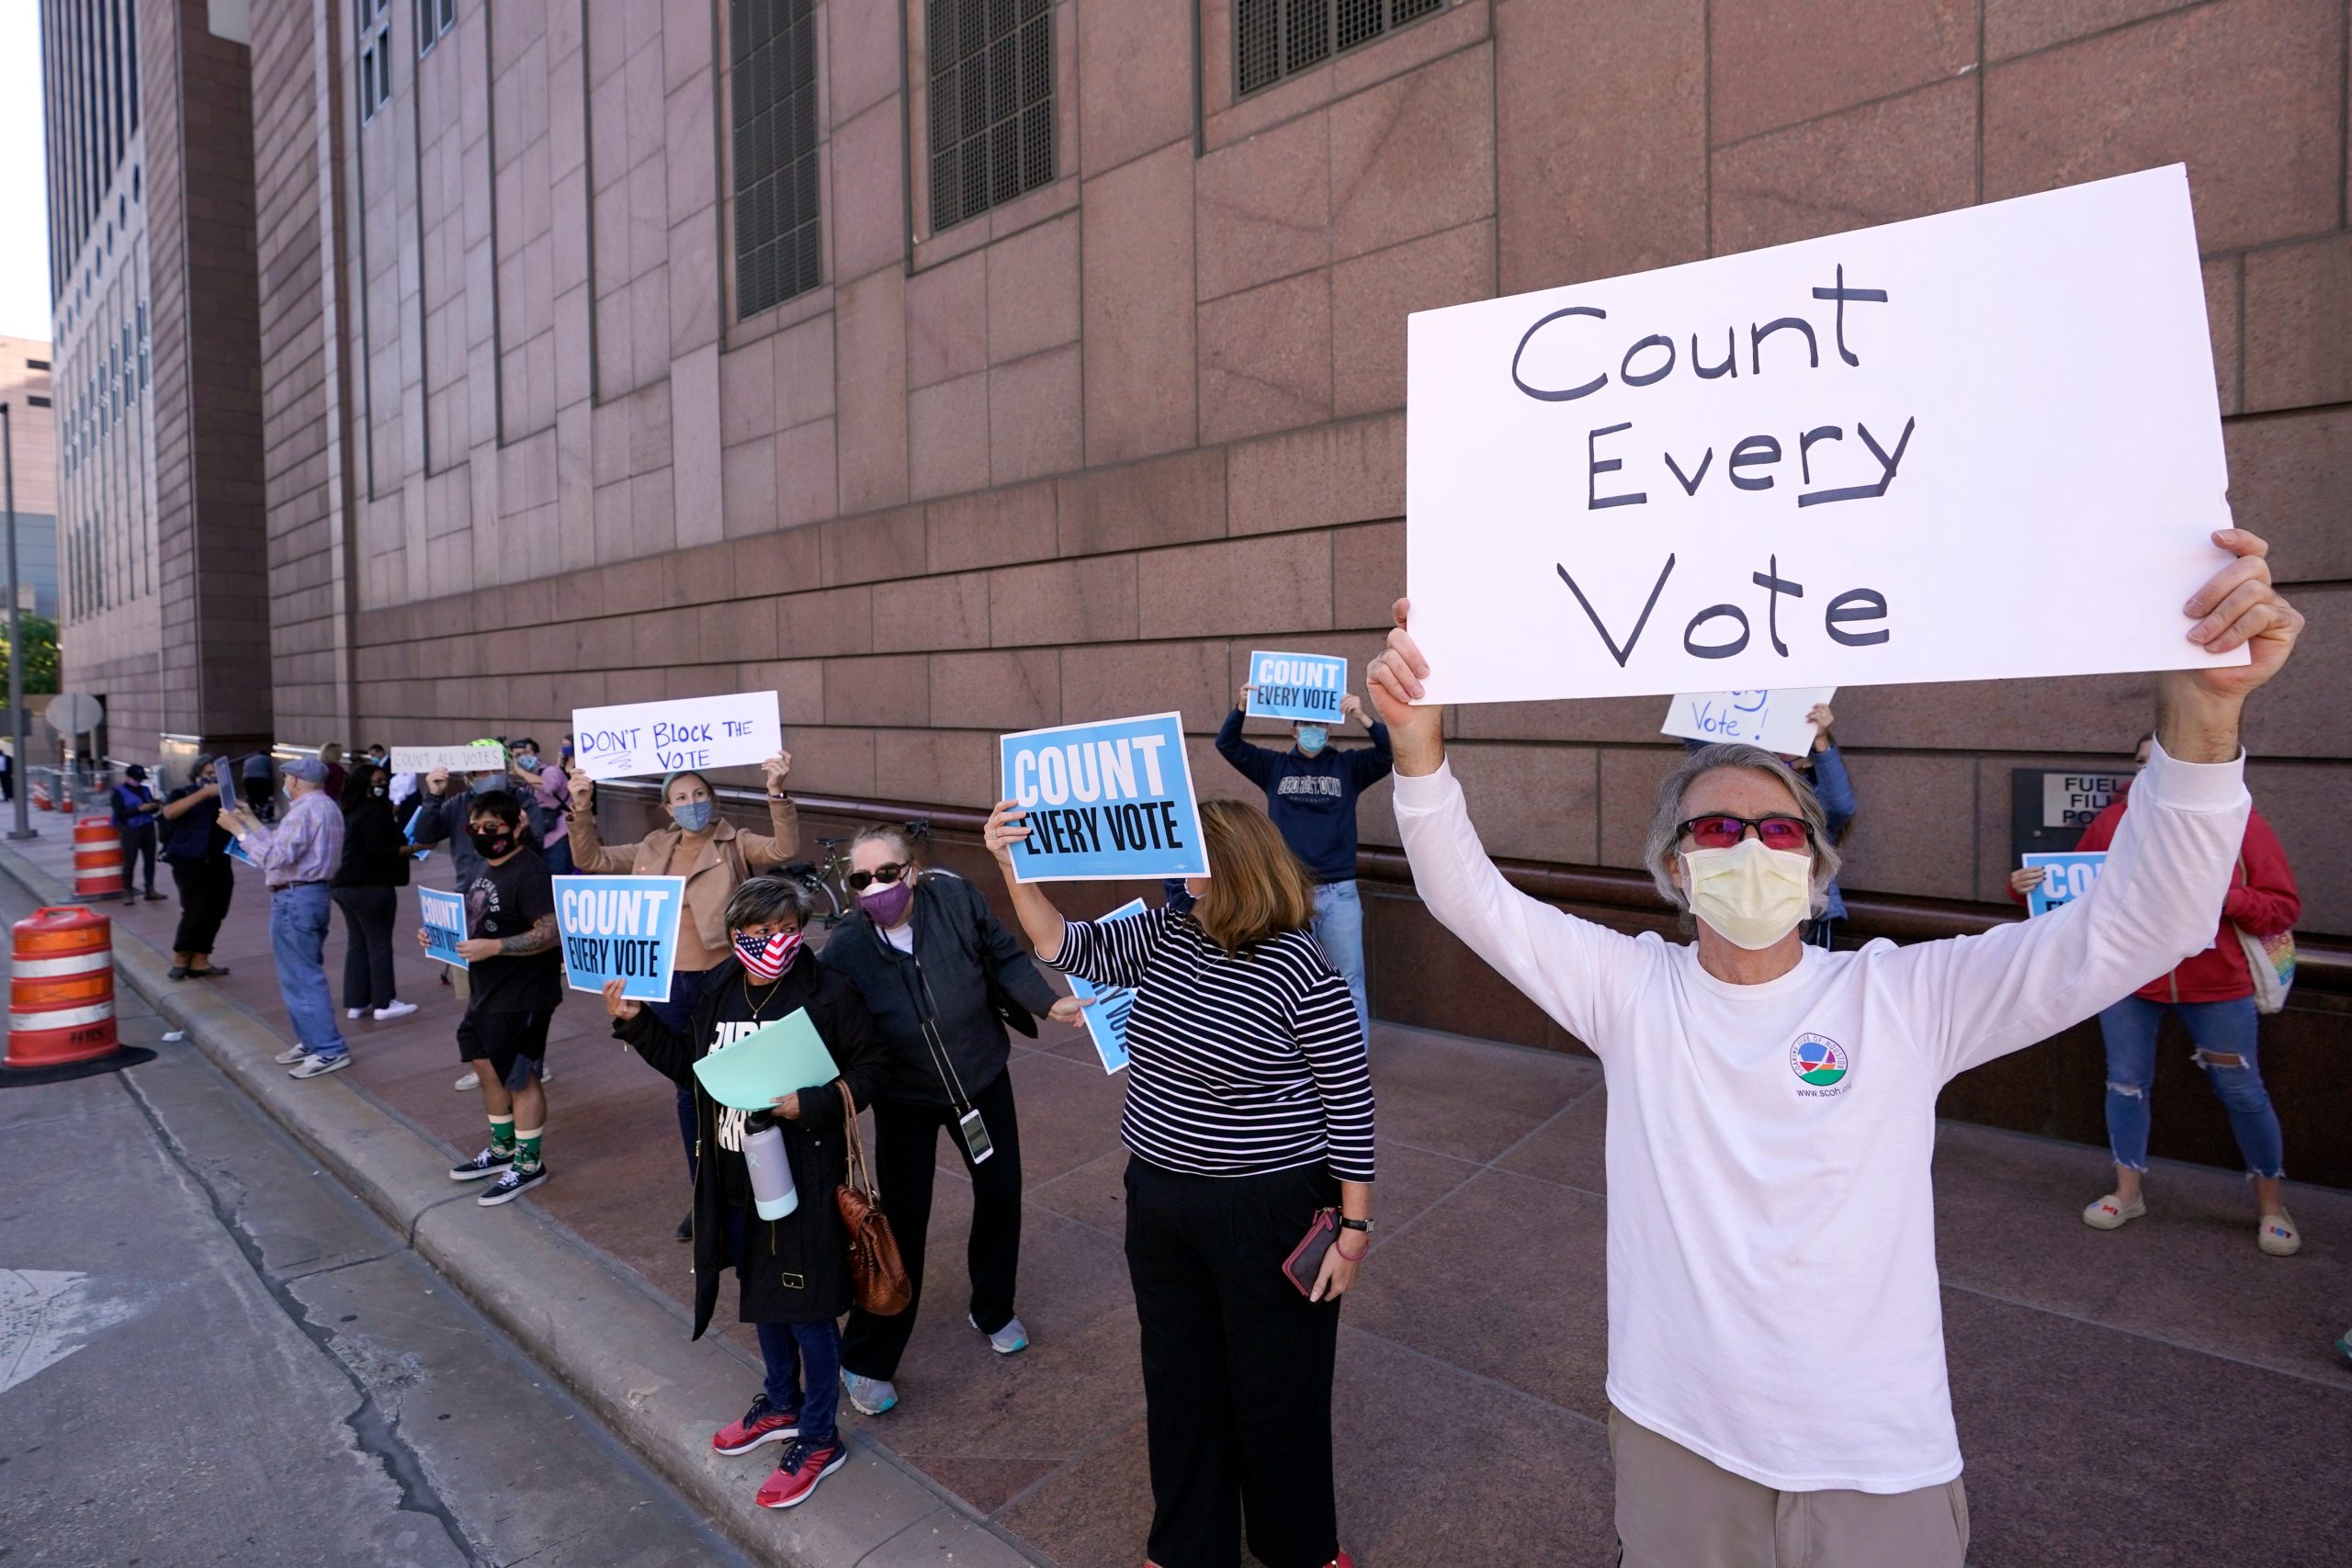 A Texas judge ruled that Republicans had no standing to reject ballots